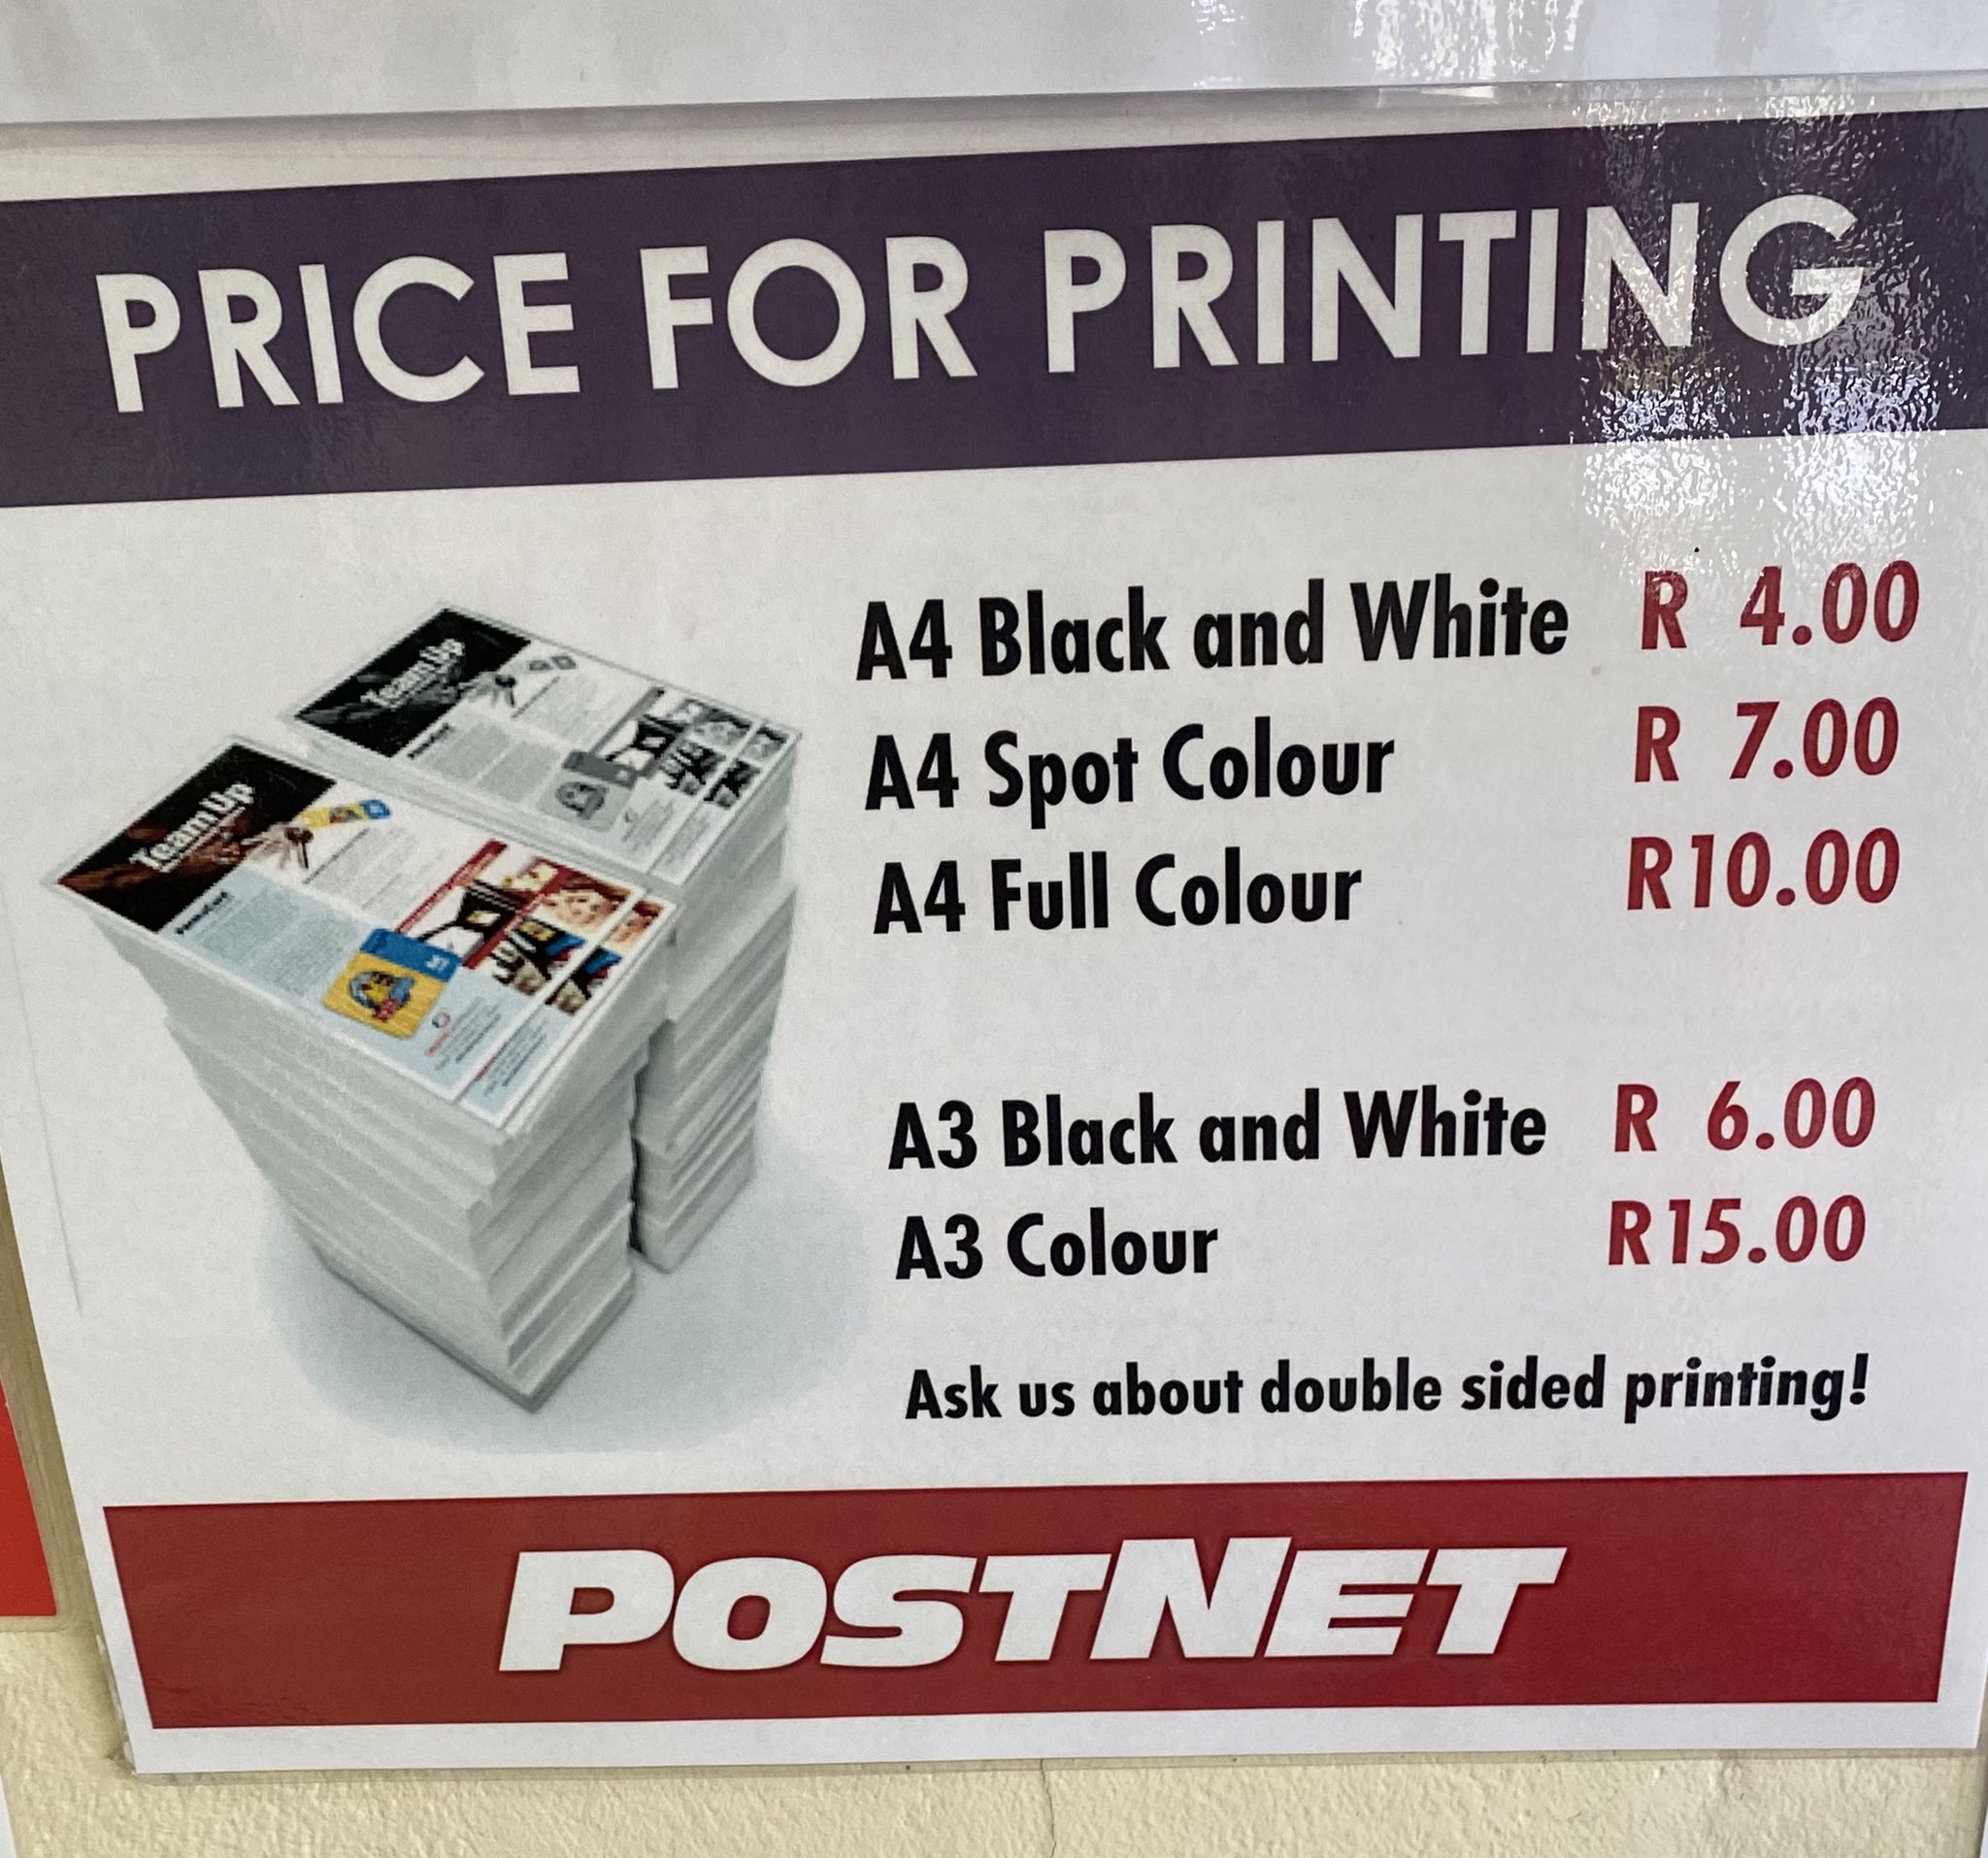 Johan Lorenzen on Twitter: "Printing black costs rands per page in Mtubatuba. A decent printer on Takealot is R600 - price of printing 150 pages. It's so expensive